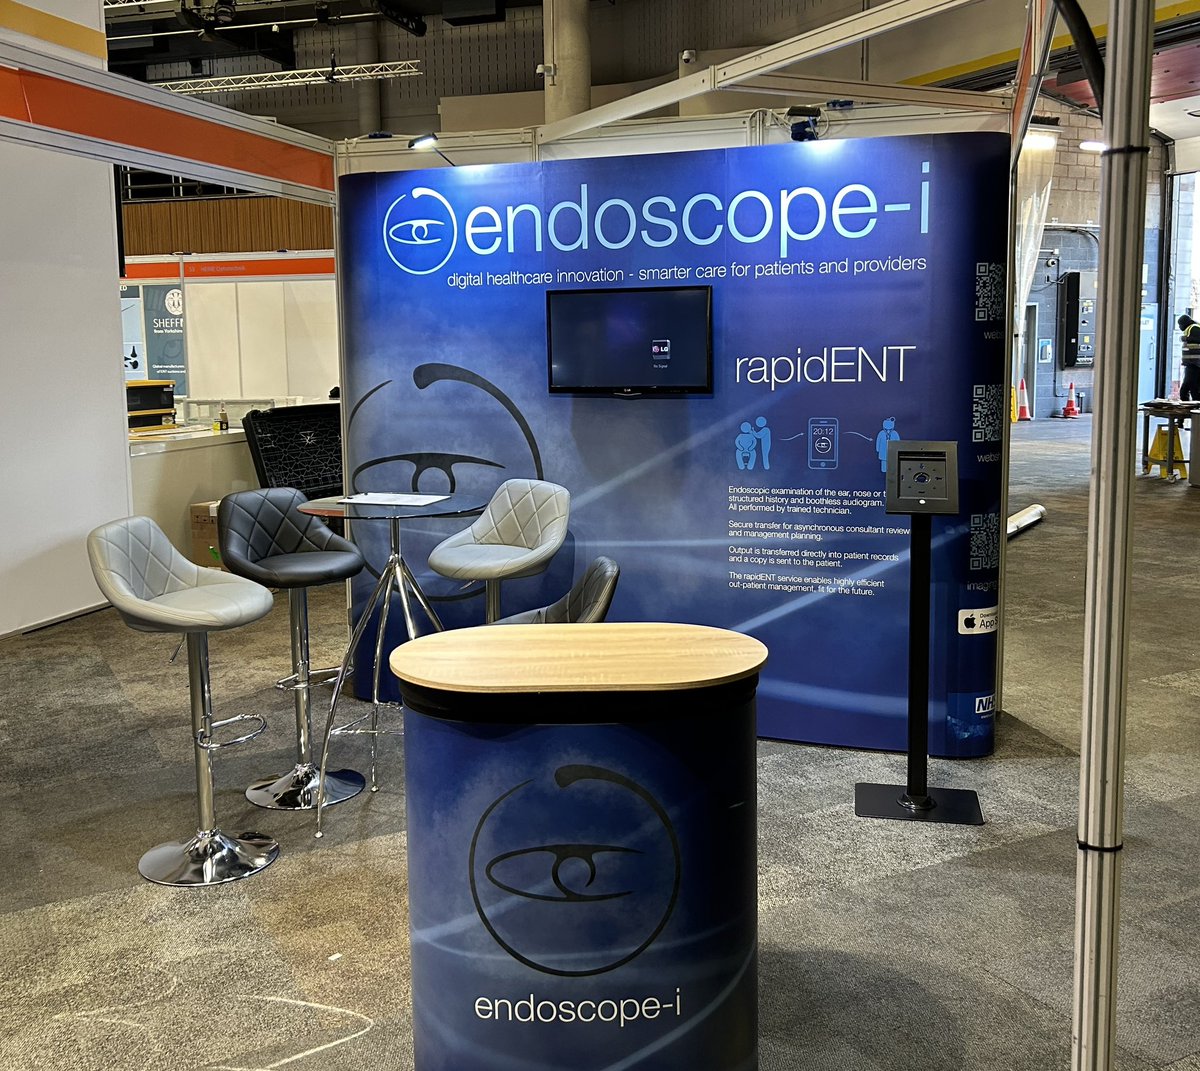 All set for #BACOInternational2023, with fresh new @endoscope_i branding courtesy of @SurfWorks! Looking forward to seeing you all there!